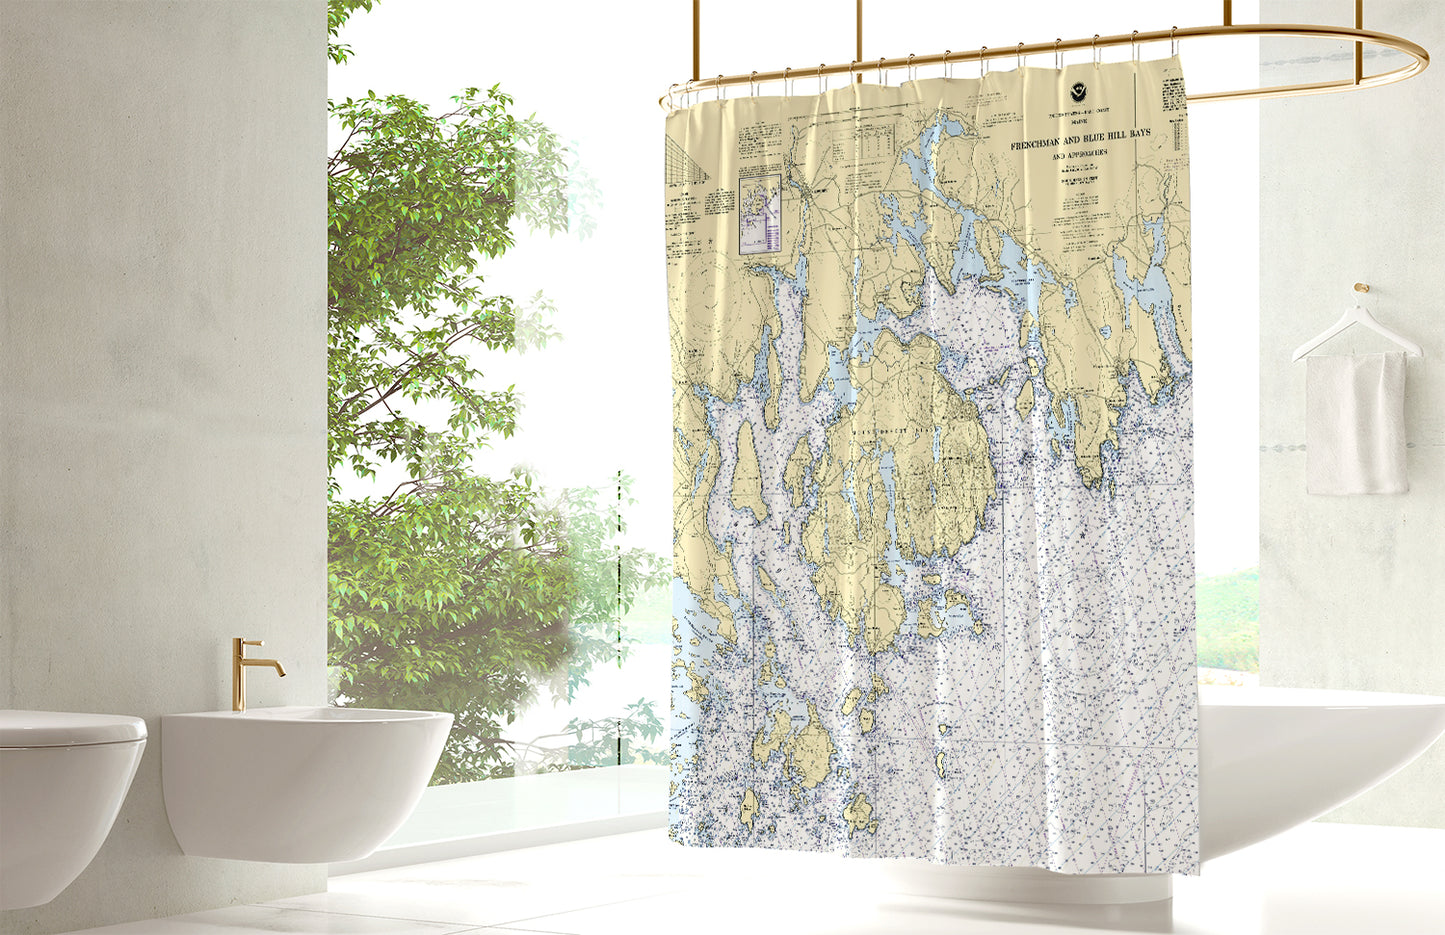 MDI with Frenchman & Blue Hill Bays, ME Nautical Chart Shower Curtain